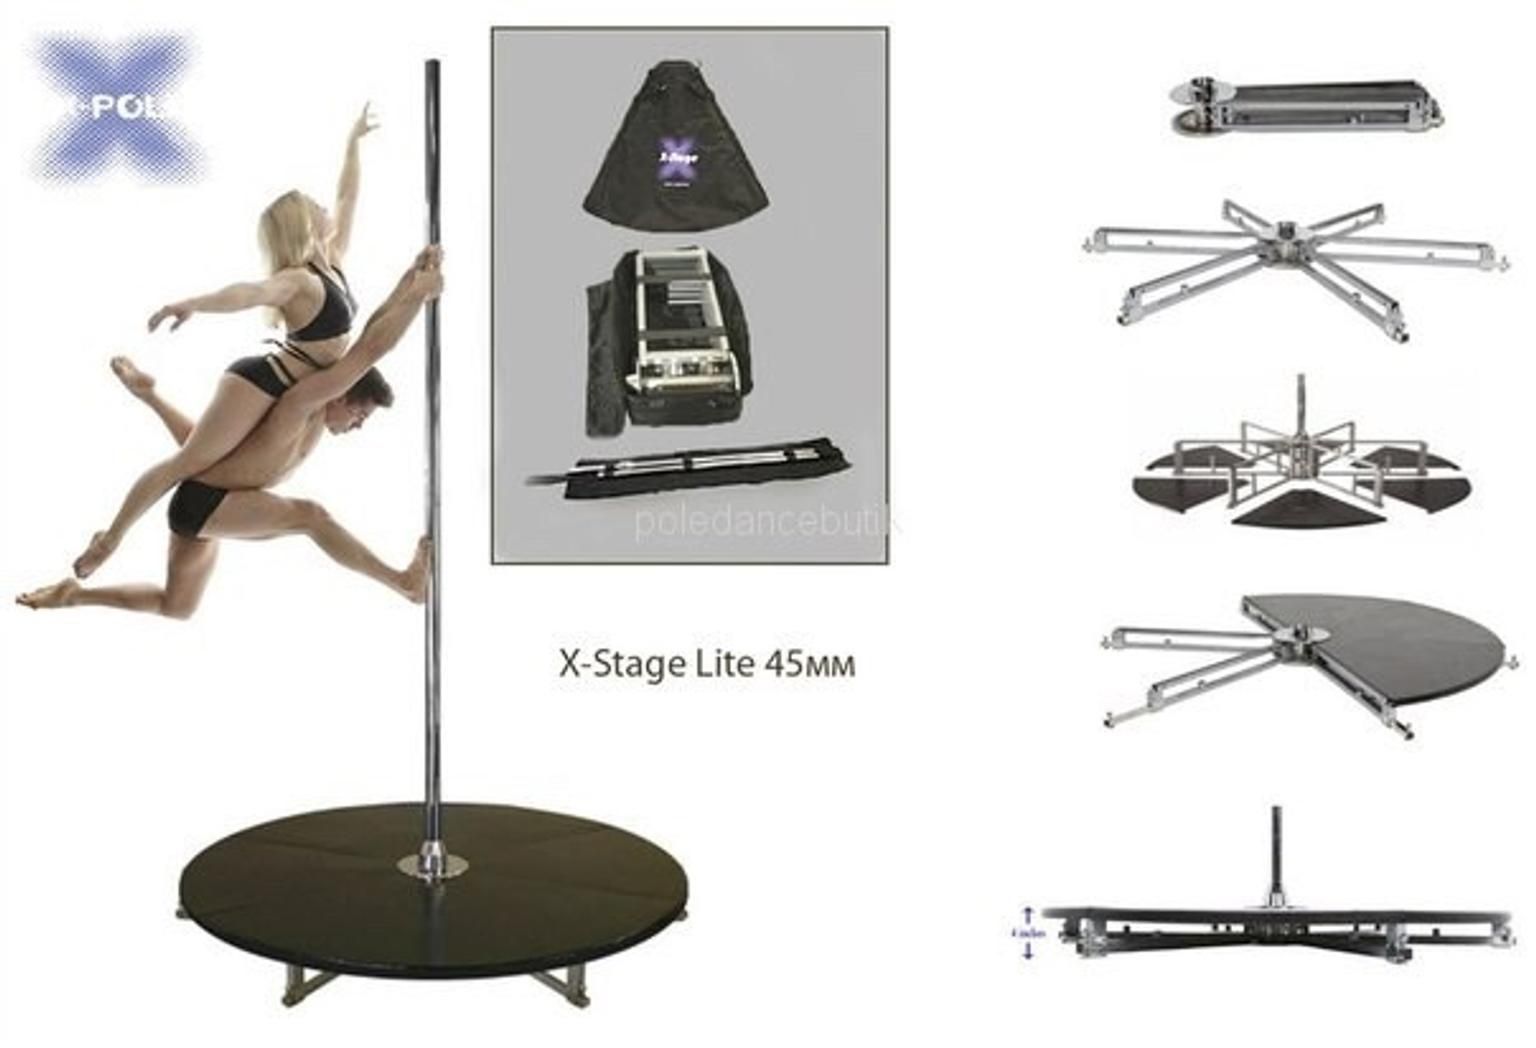 Rent to Buy one of our XStage XLite freestanding pole dance podiums